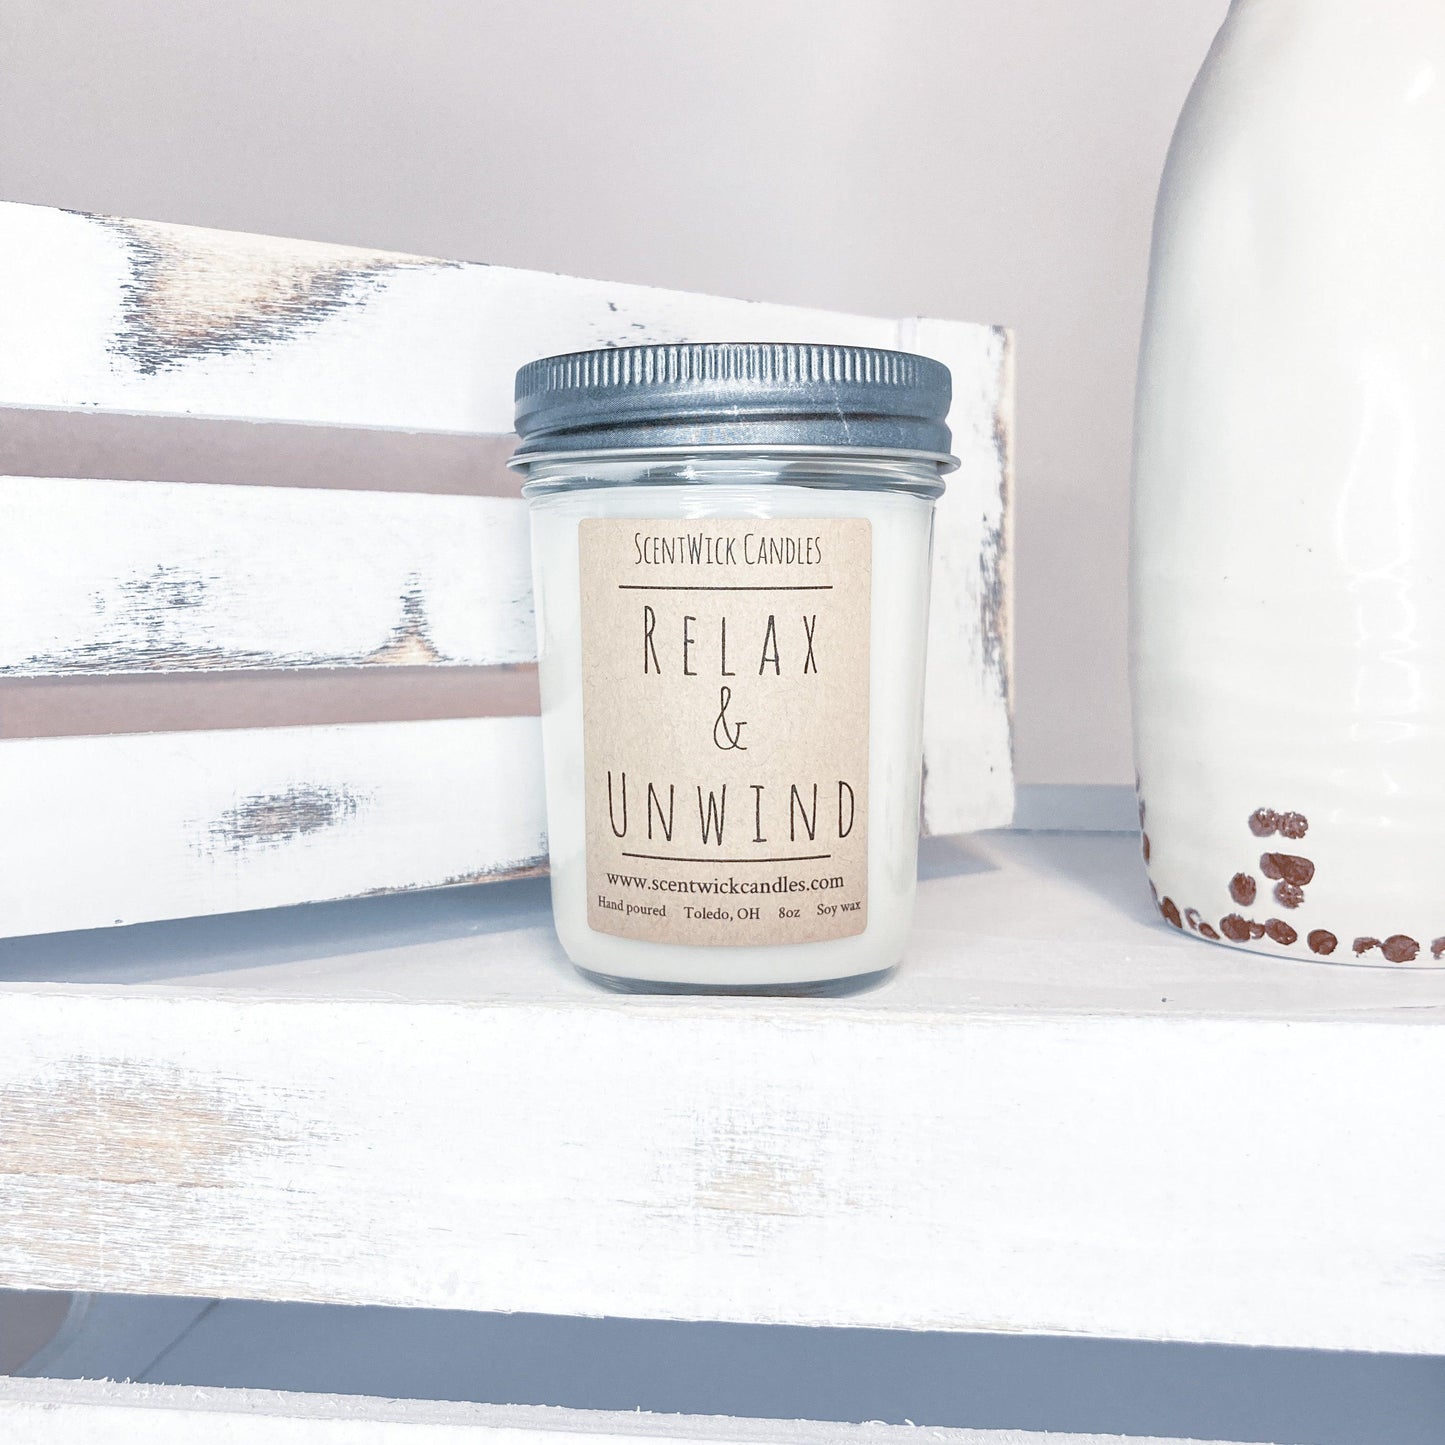 Relax & Unwind Candle - ScentWick Candles